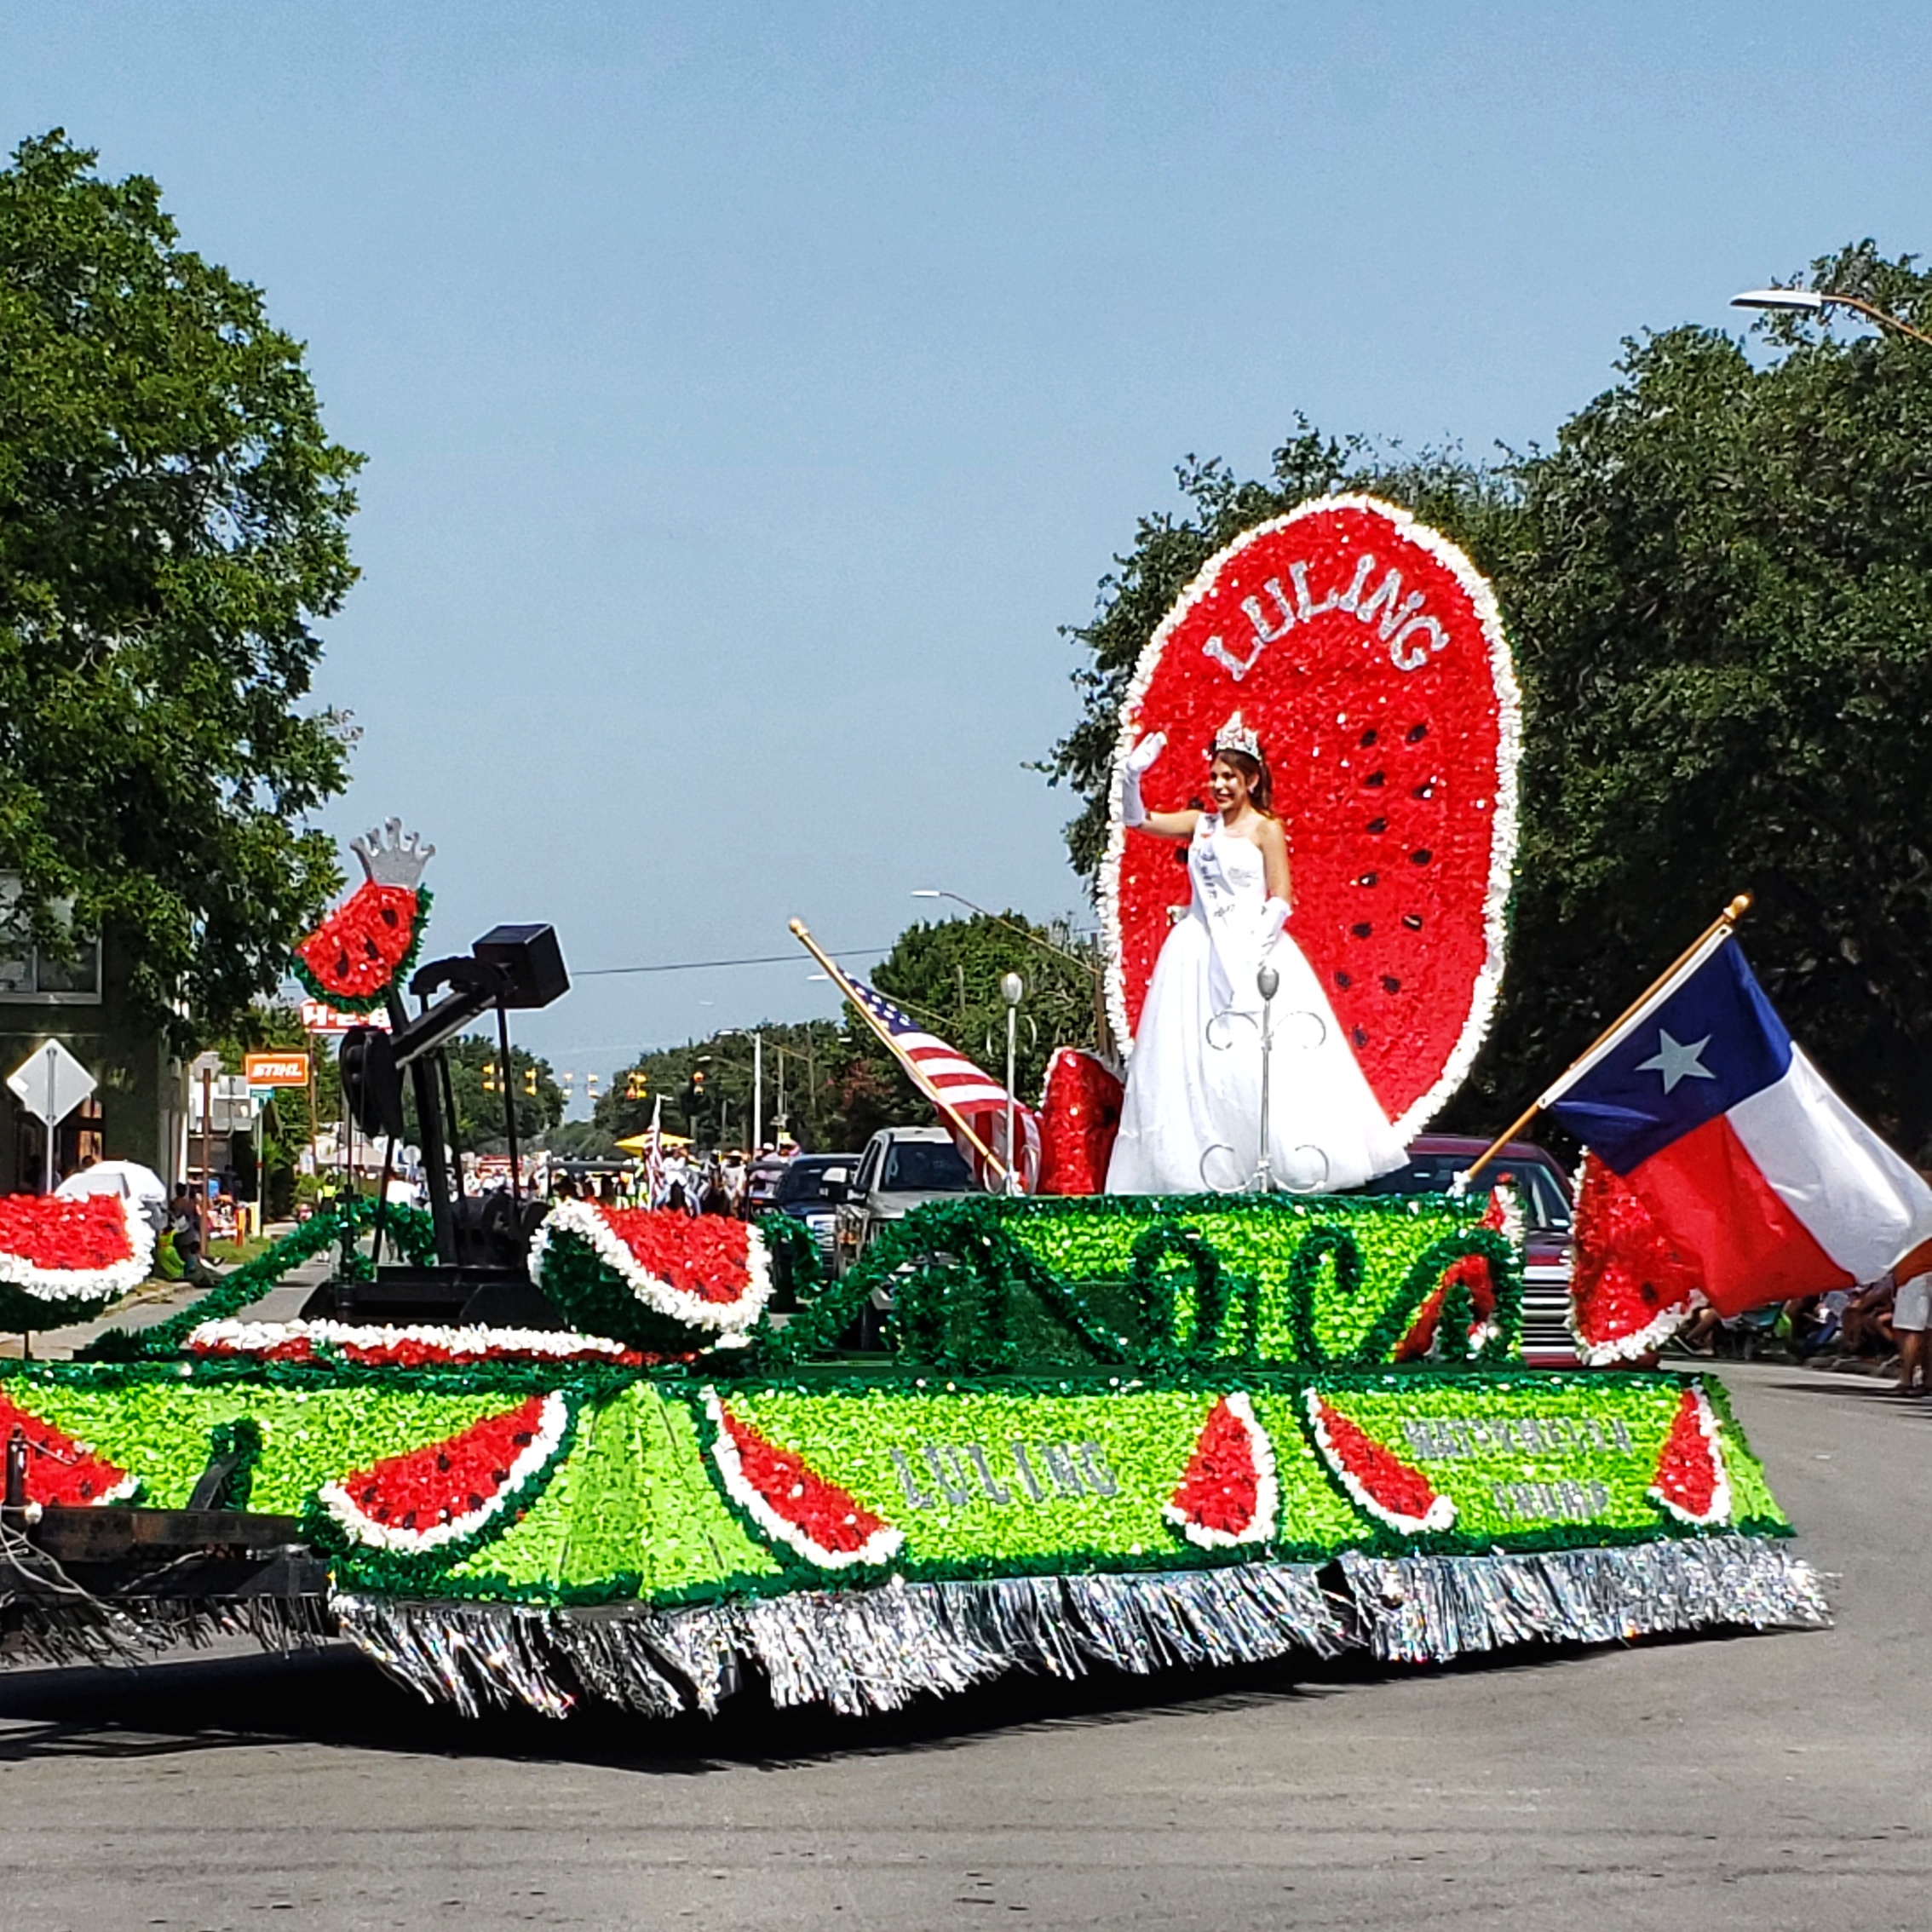 10 Things to Do at a Watermelon Festival (Luling Watermelon Thump